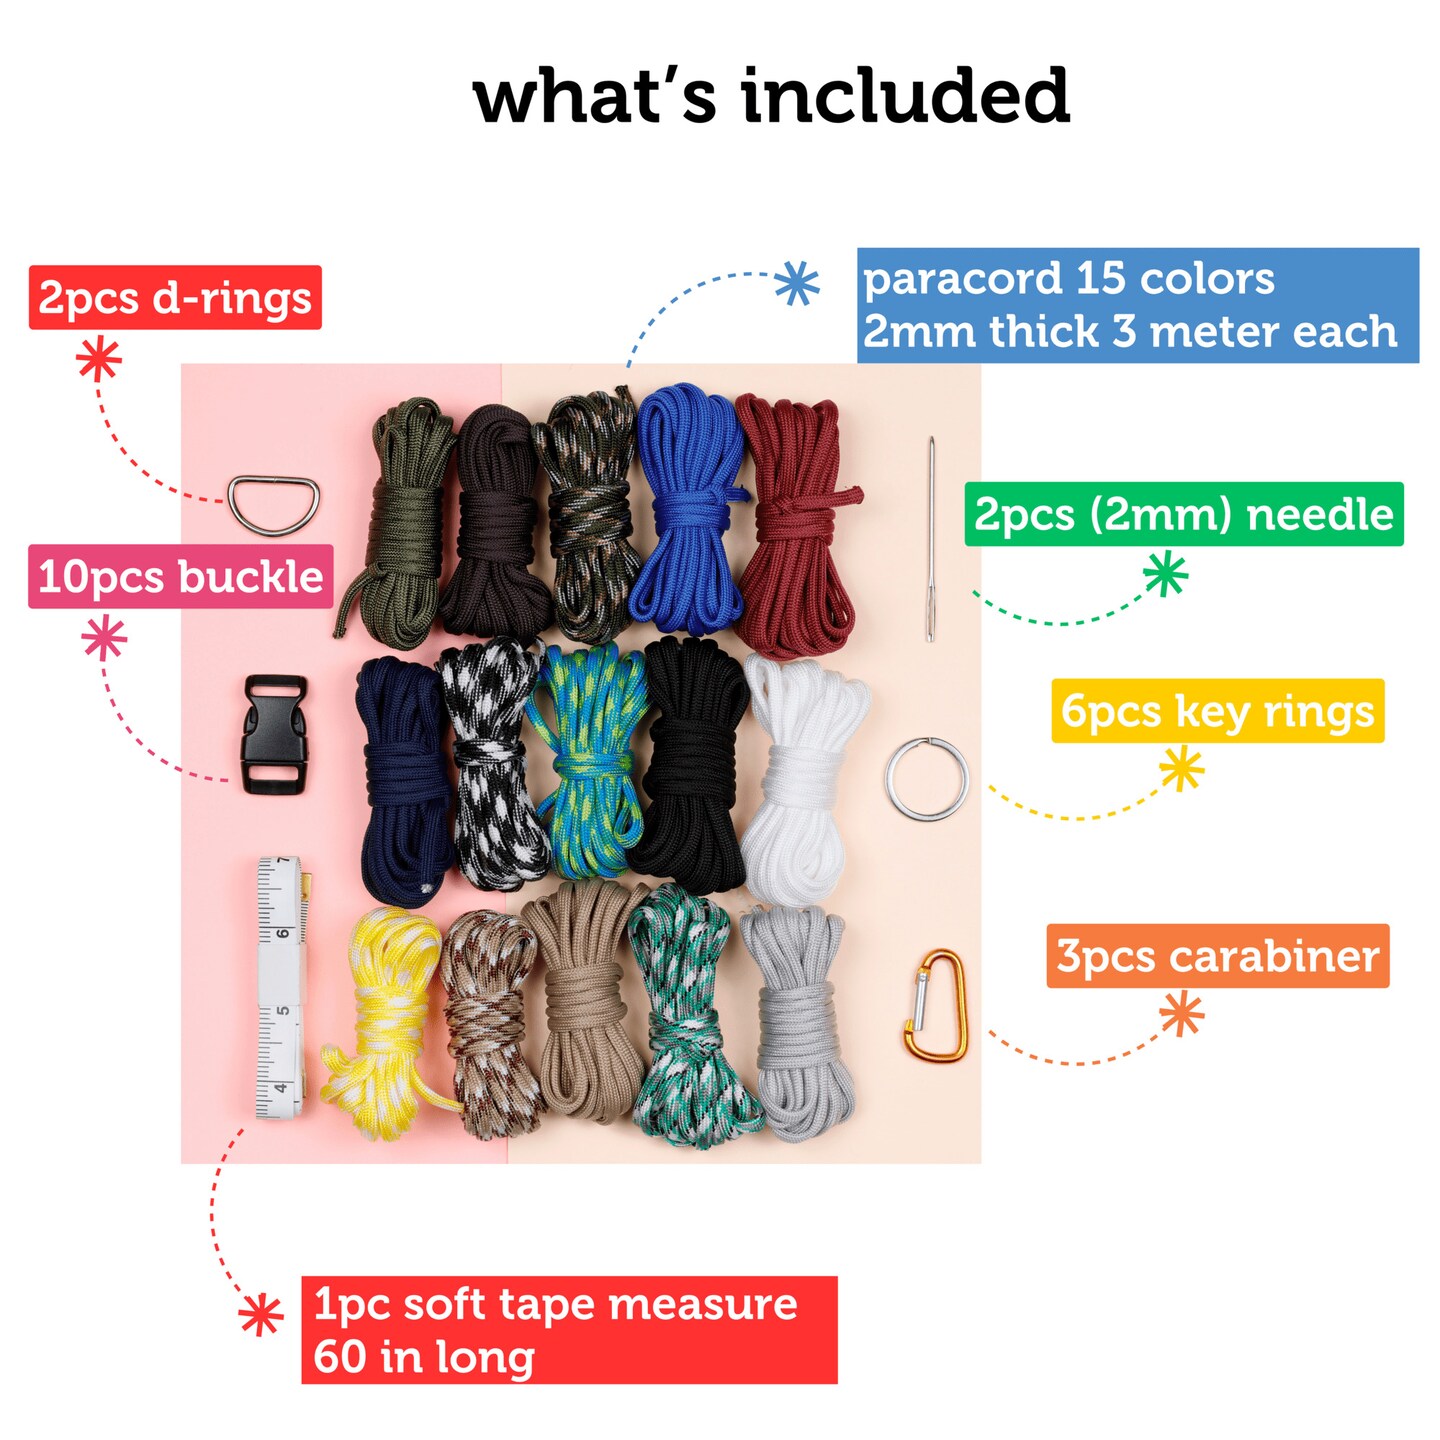 Incraftables Paracord kit with 15 Colors Paracord Rope (2mm